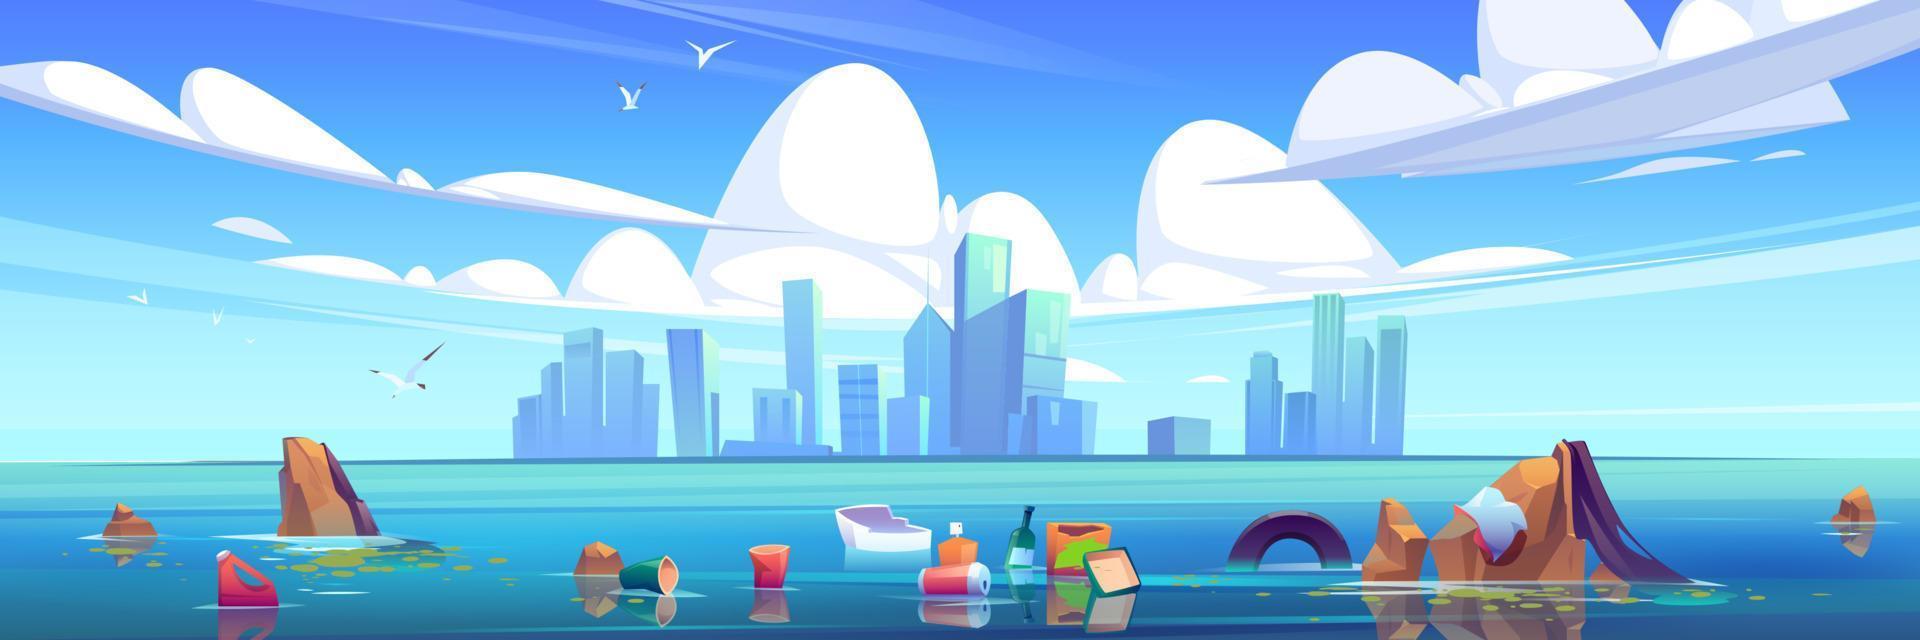 Lake with plastic trash in water and city vector